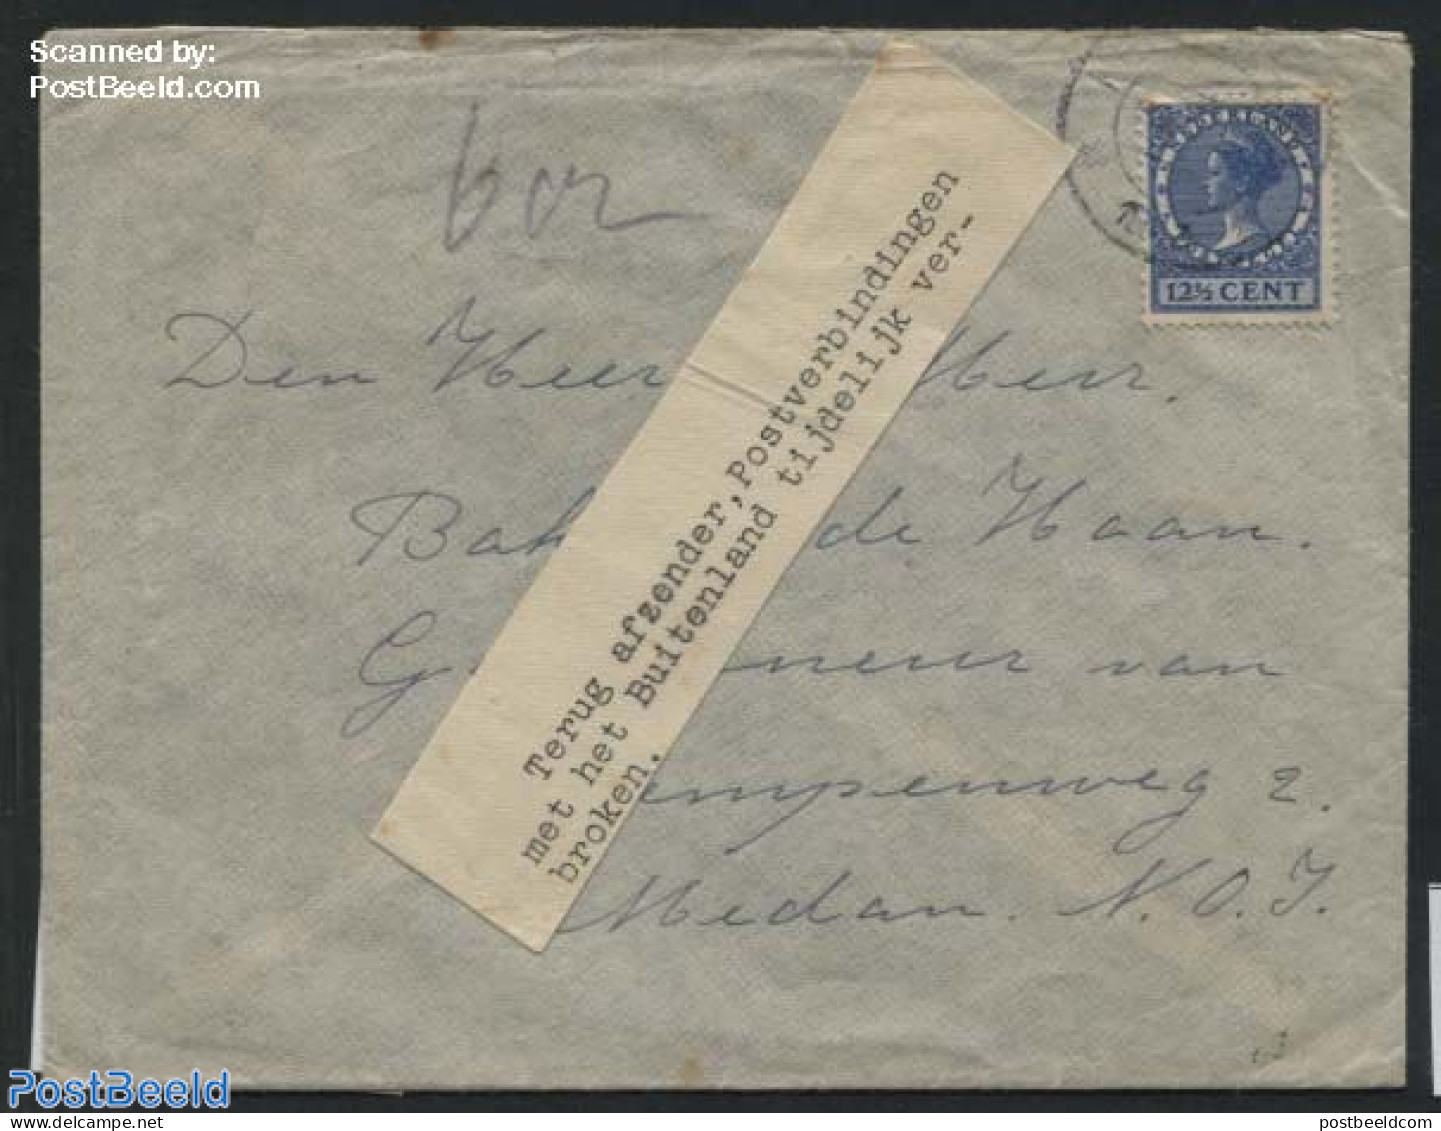 Netherlands 1940 Letter From Heerenveen To Medan, Returned Due To Broken Postal Connection, Postal History - Covers & Documents